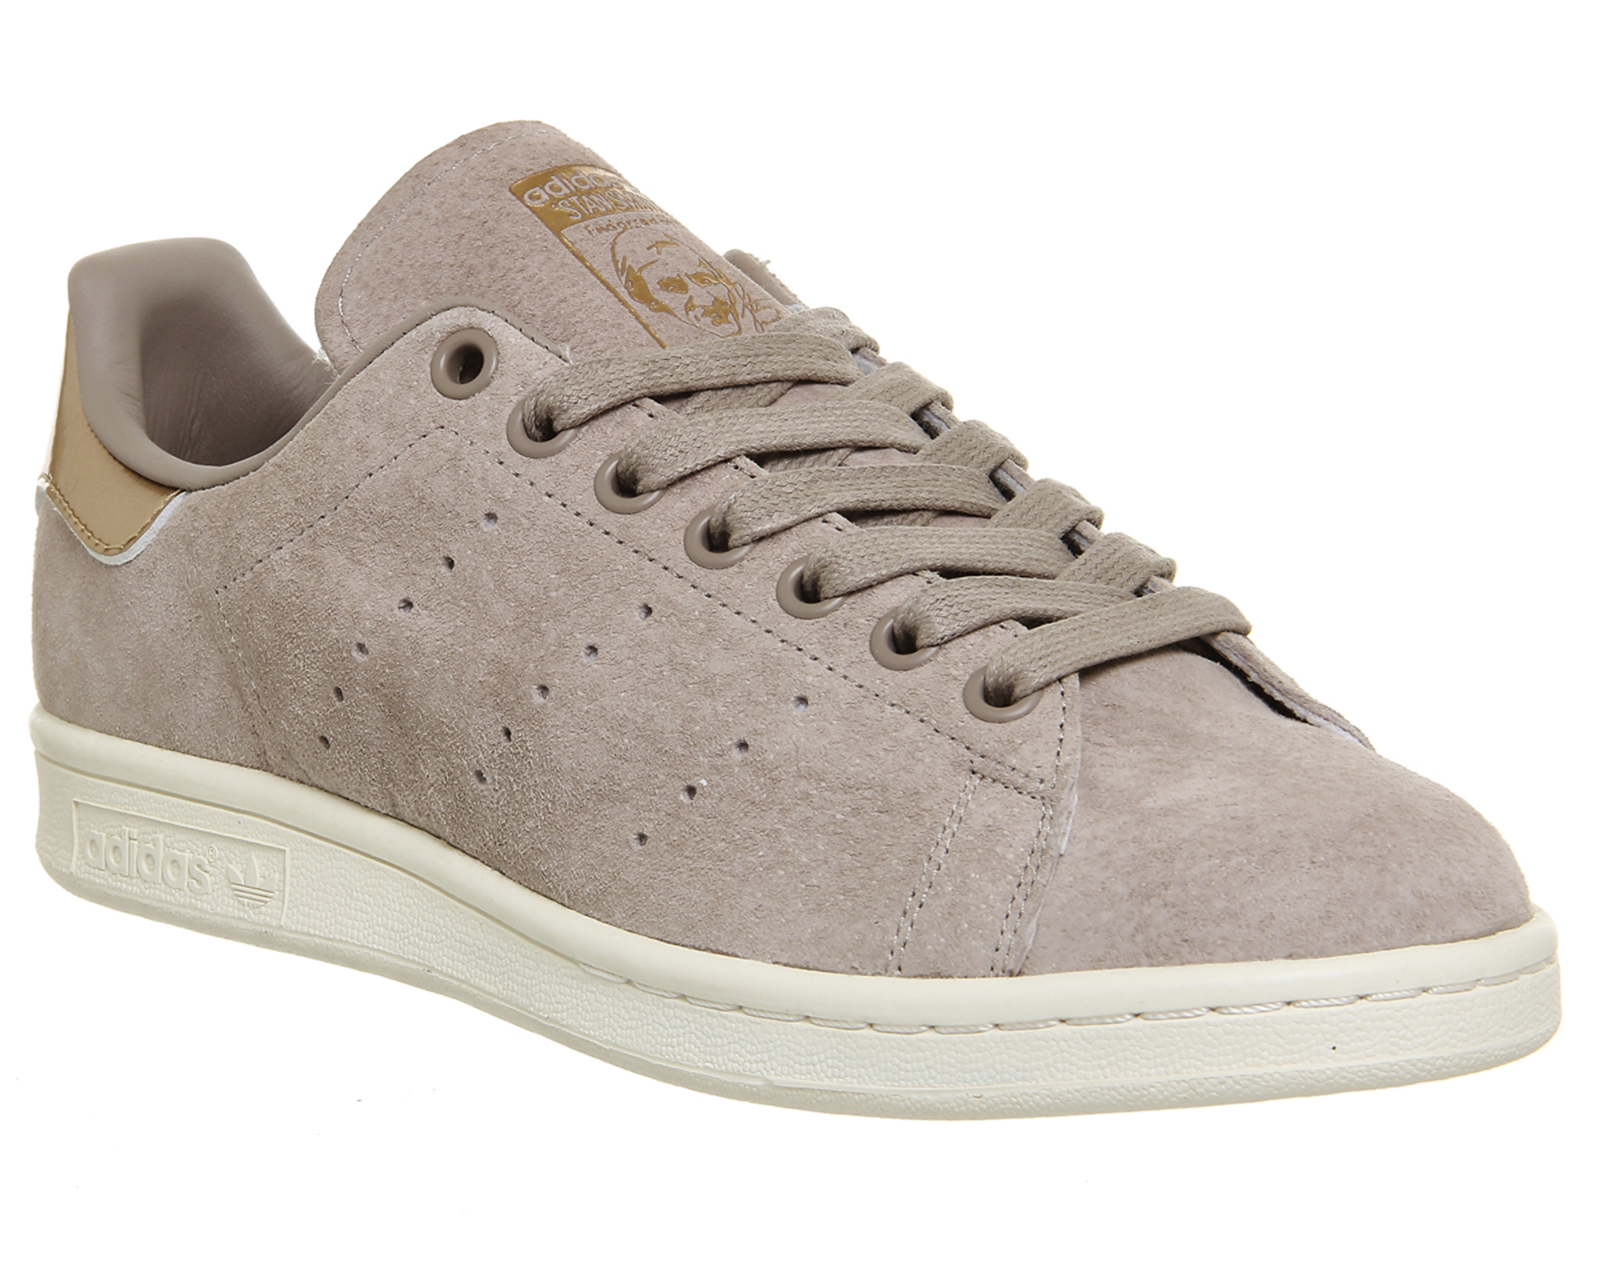 adidas Stan Smith Vapour Grey Copper Exclusive - Women's Trainers